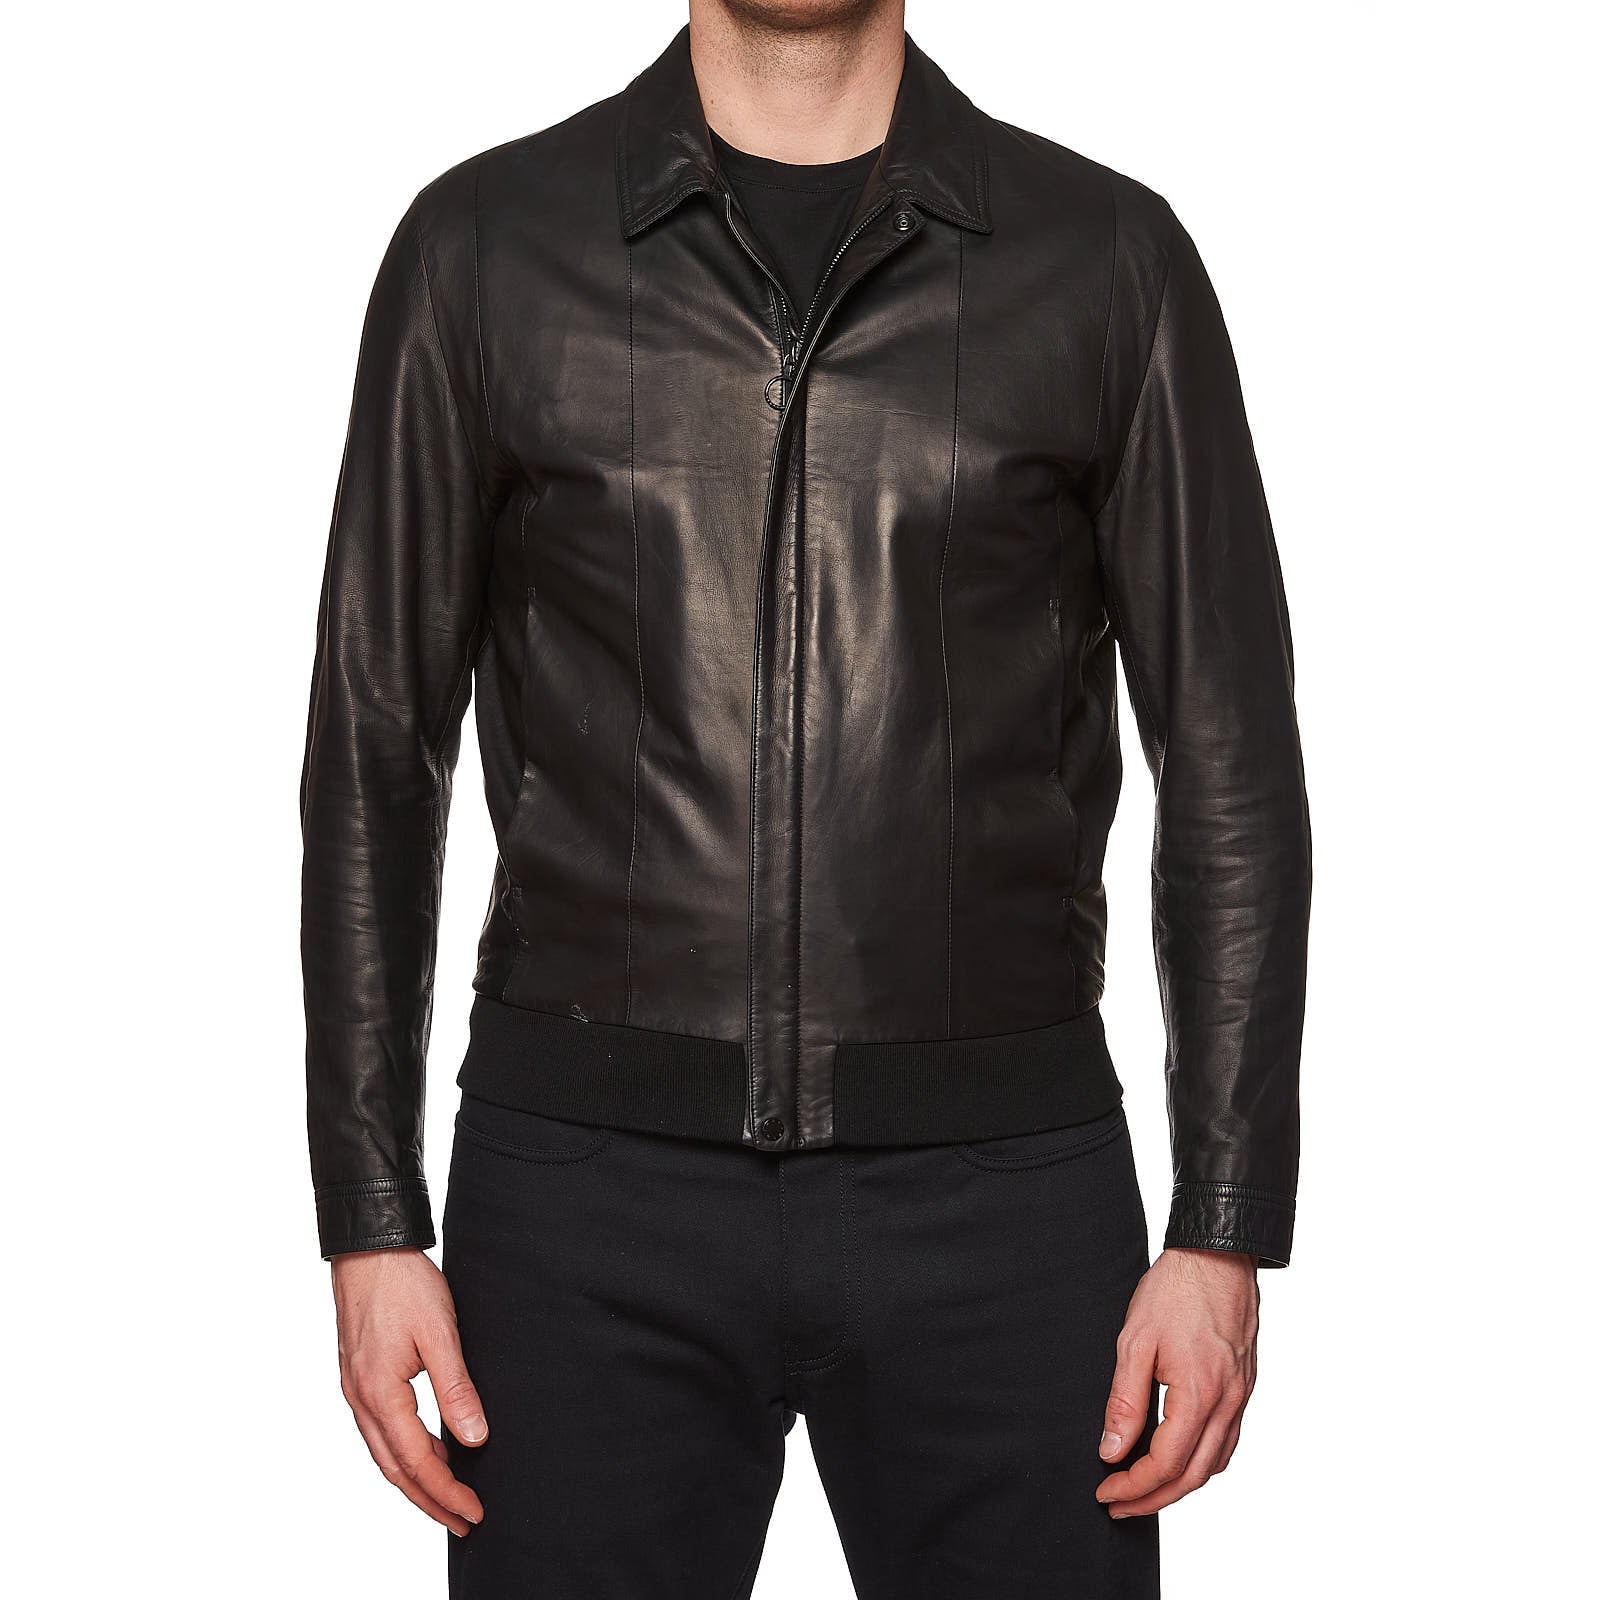 SERAPHIN Black Lamb Leather Fully Lined Bomber Jacket FR 50 US M SERAPHIN